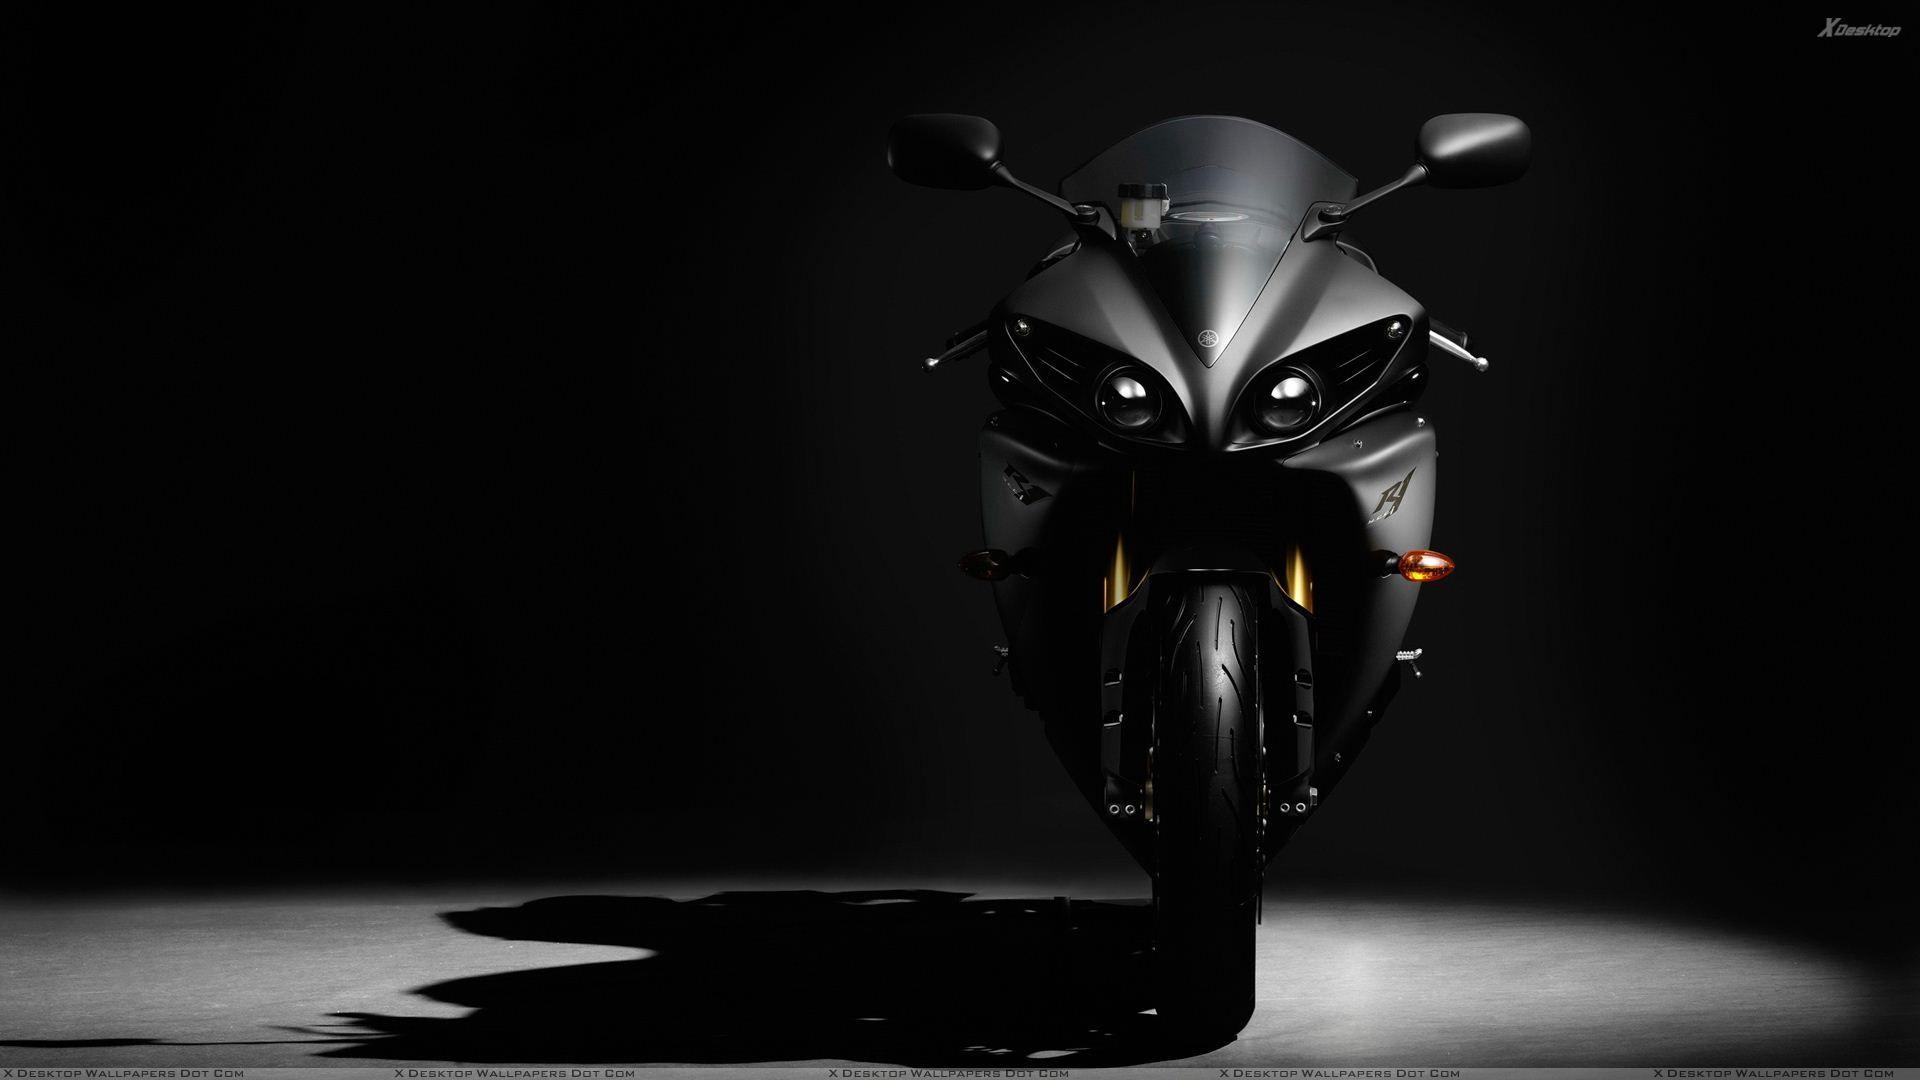 Yamaha YZF R1 Stylish Front Pose In Black Wallpaper